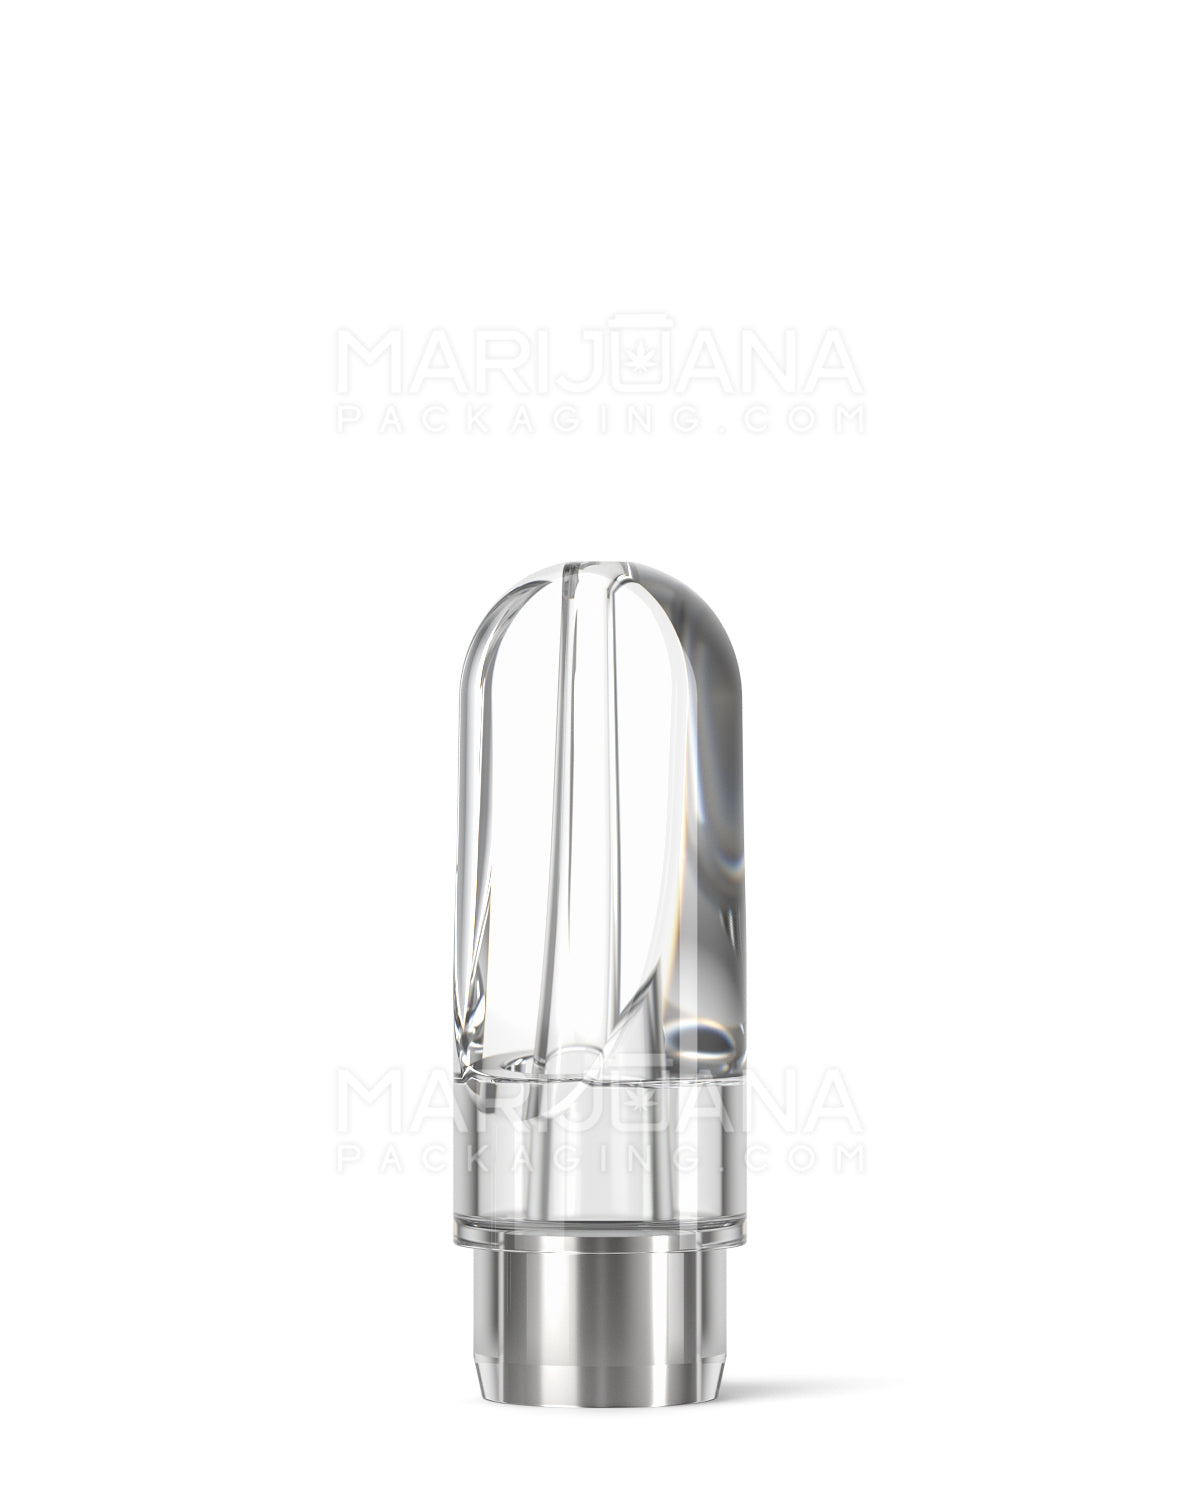 AVD | Flat Vape Mouthpiece for GoodCarts Plastic Cartridges | Clear Plastic - Press On - 600 Count - 2